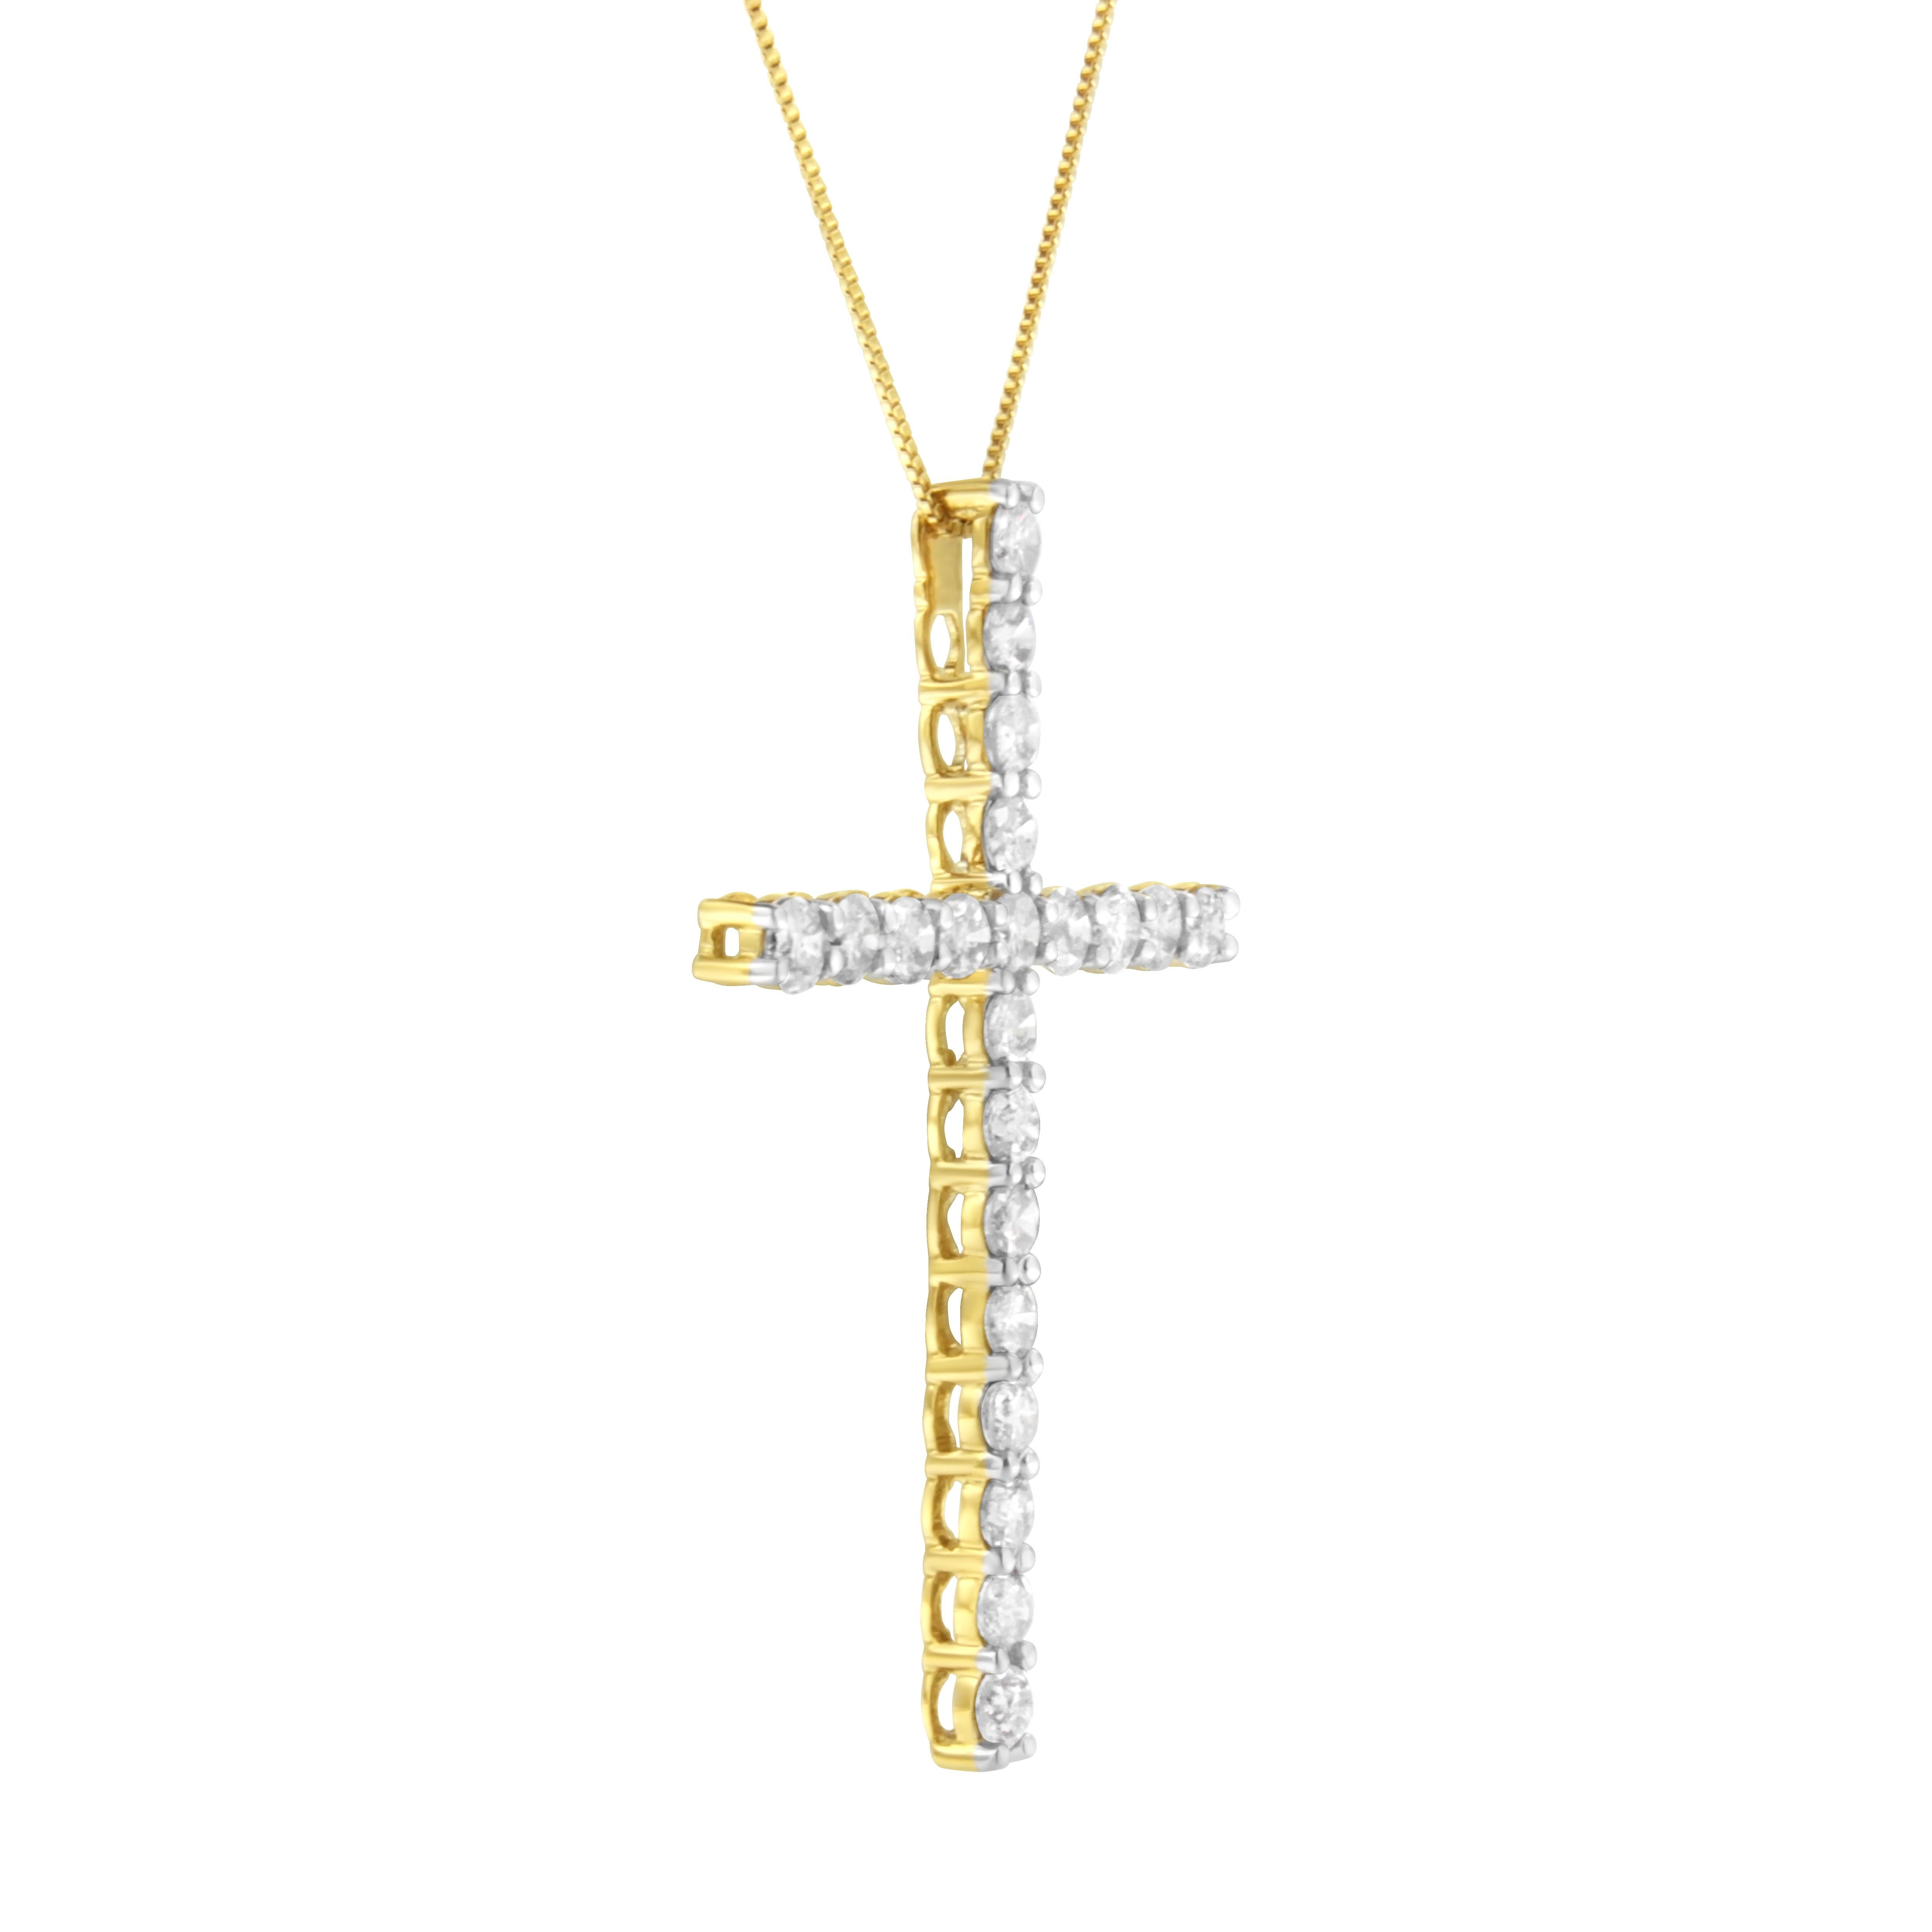 Contemporary Yellow Gold Plated Sterling Silver 4.0 Carat Diamond Cross Pendant Necklace For Sale